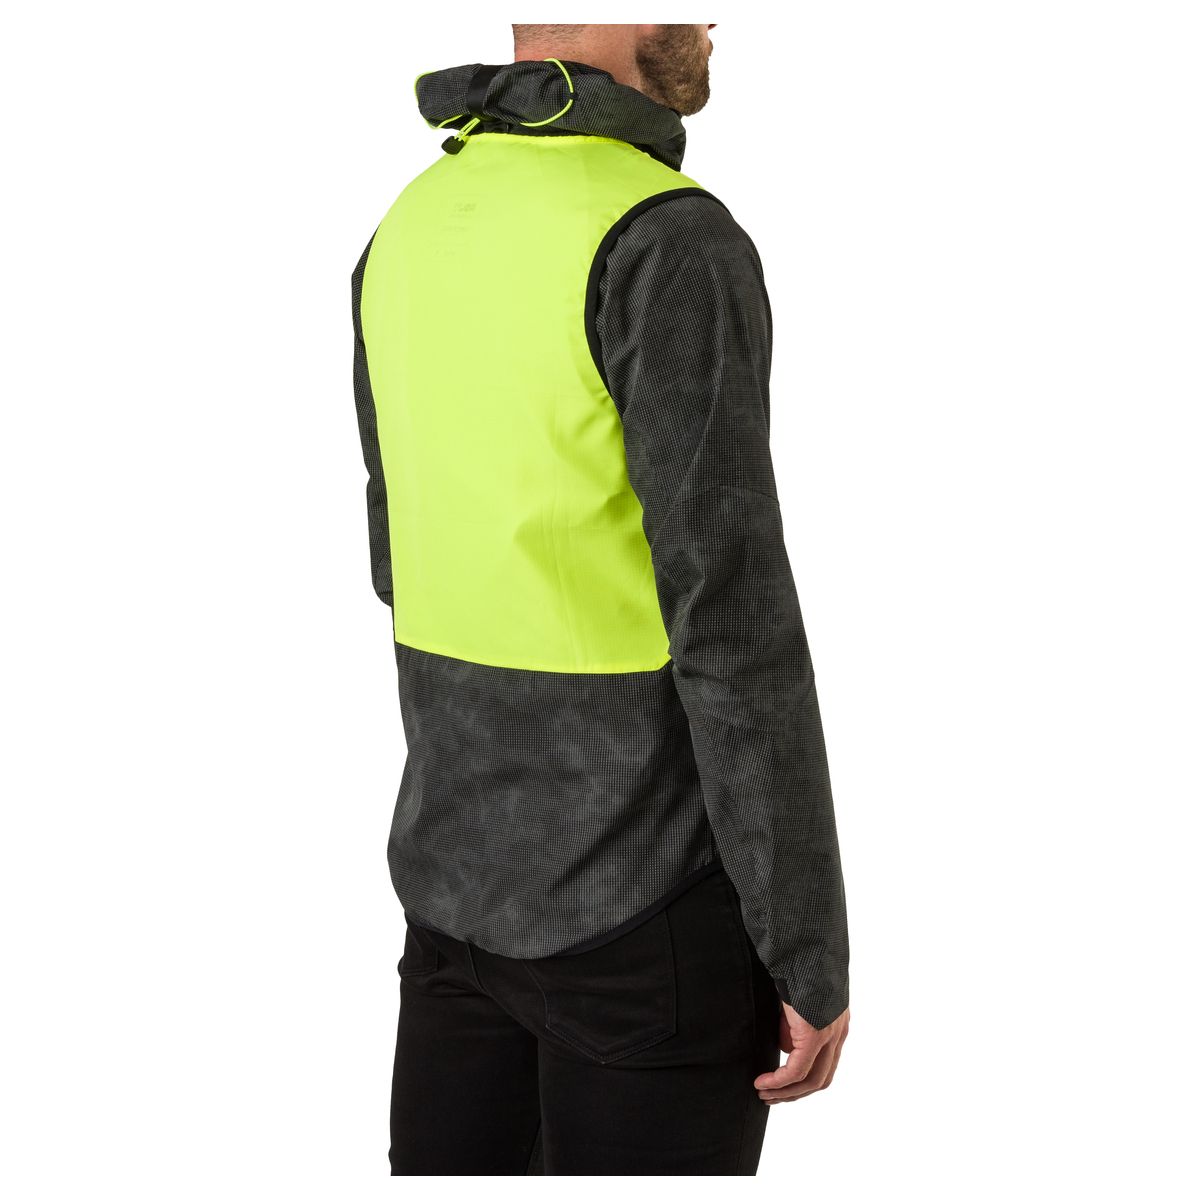 Compact Gilet Commuter Hi-vis & Reflection fit example